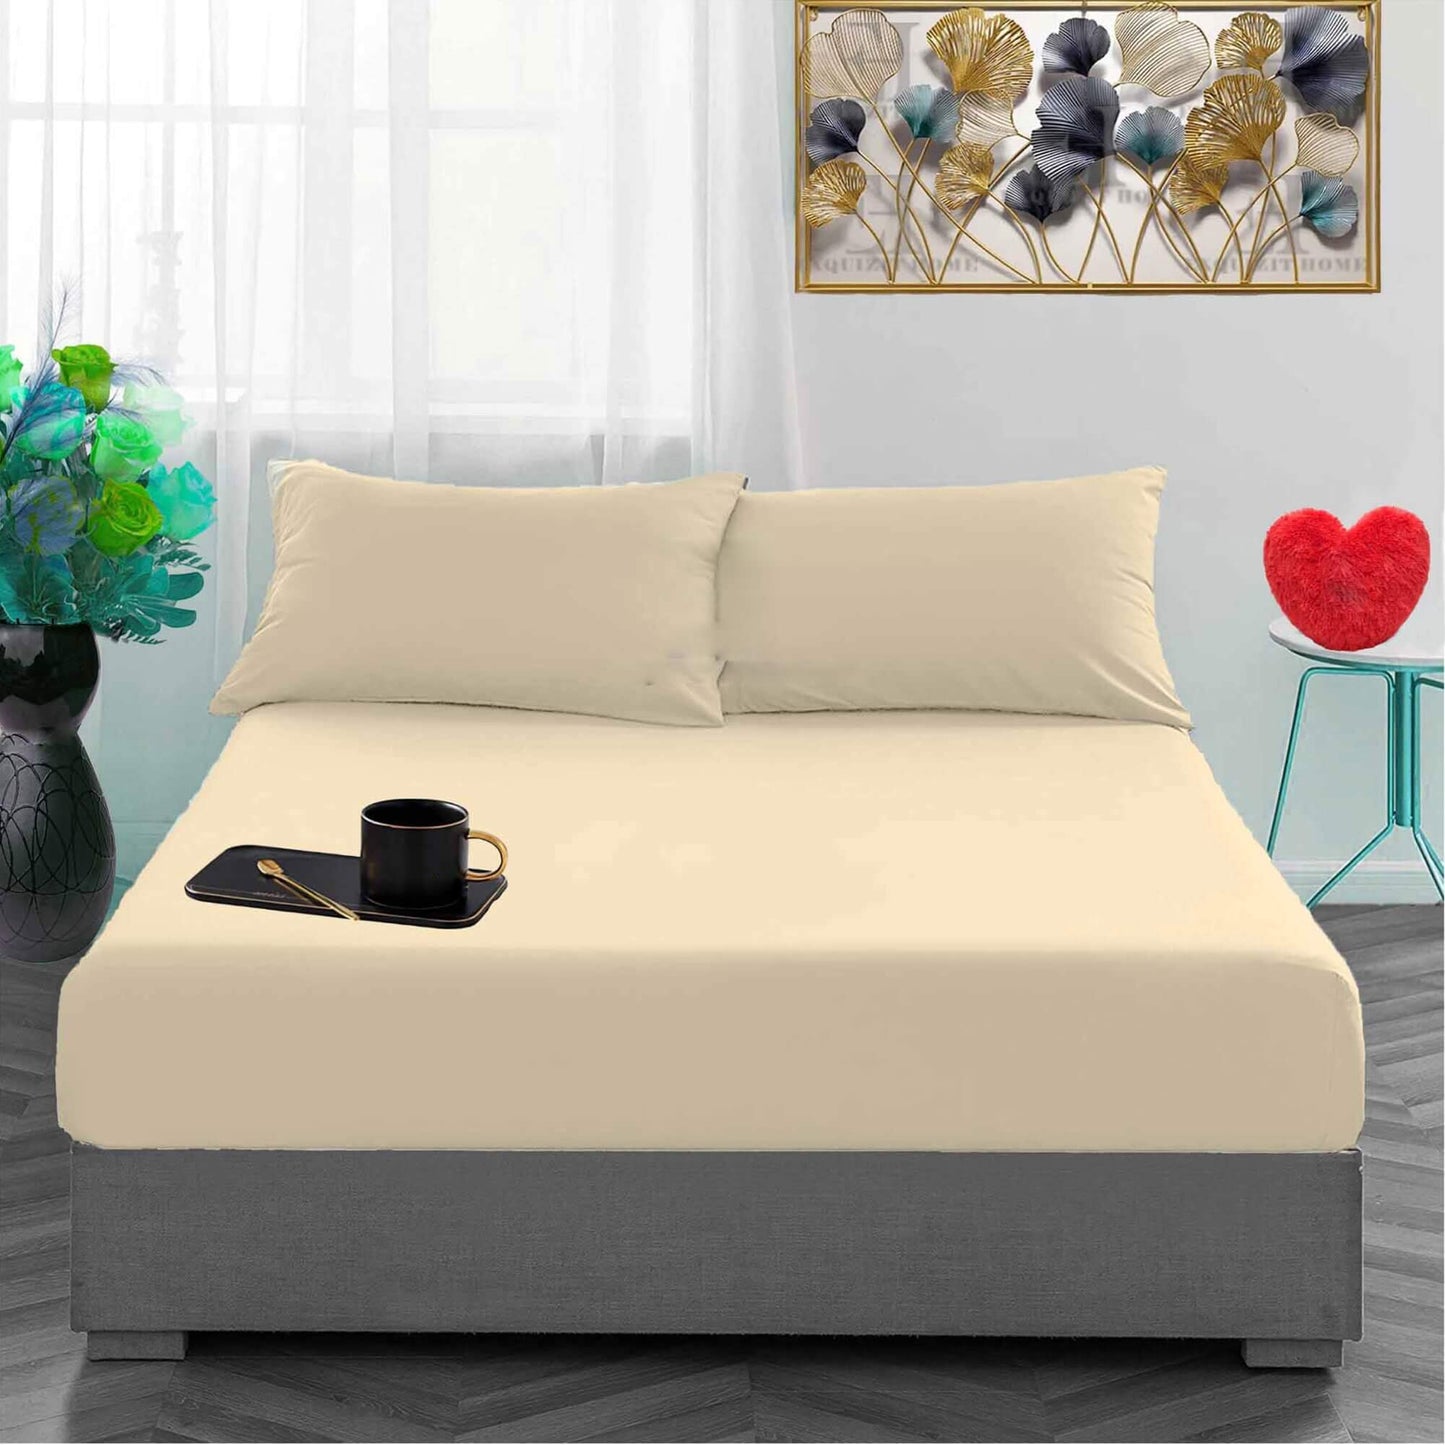 Small Double Fitted Sheet 100% Brushed Cotton Bed Sheet - TheComfortshop.co.ukBed Sheets0721718977308thecomfortshopTheComfortshop.co.ukFlannelette FIT Latte 4FT-1Latte4FT Small DoubleSmall Double Fitted Sheet 100% Brushed Cotton Bed Sheet - TheComfortshop.co.uk